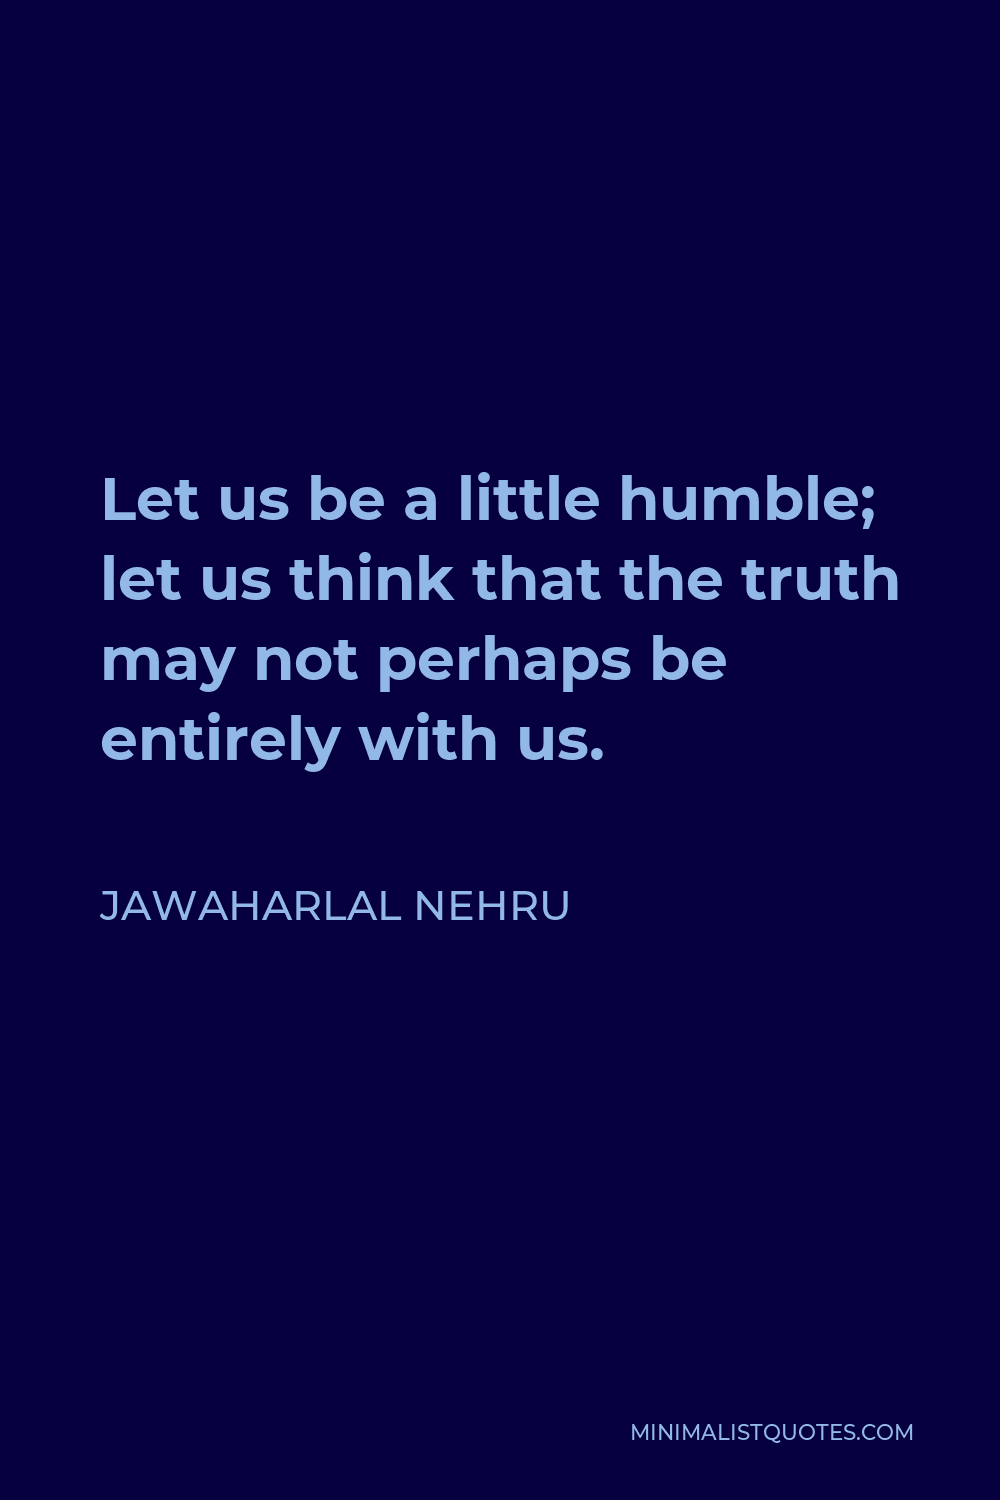 Jawaharlal Nehru Quote - Let us be a little humble; let us think that the truth may not perhaps be entirely with us.